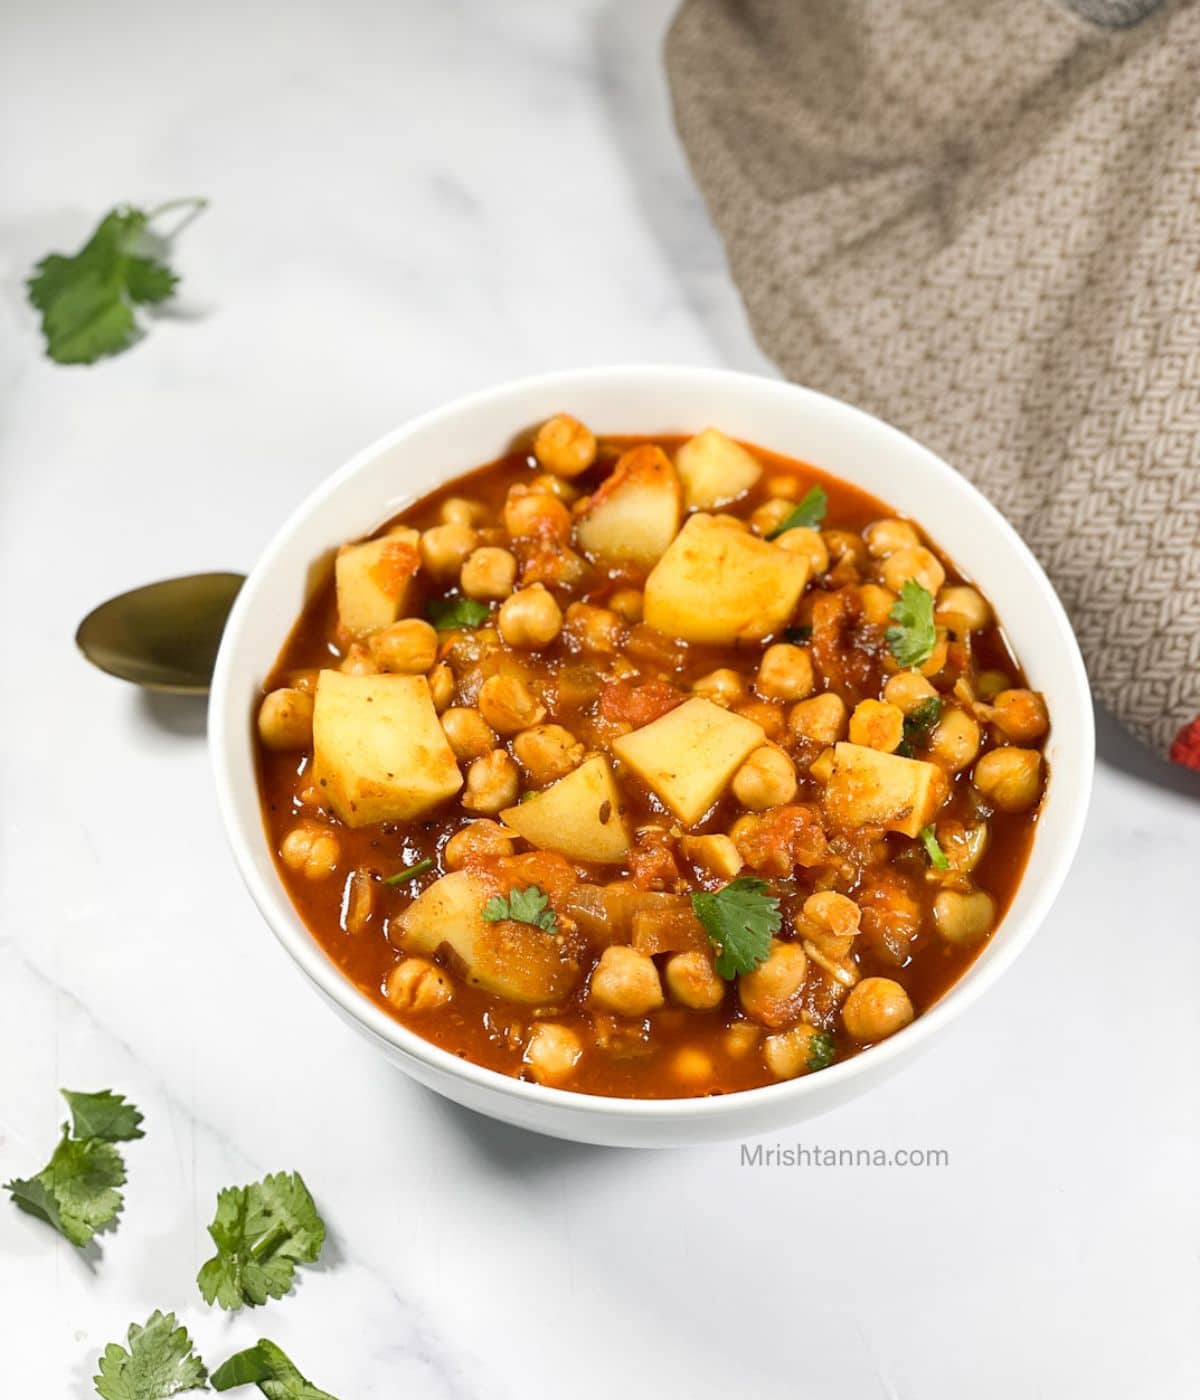 A bowl of aloo chana masala is on the table with a spoon by the side.